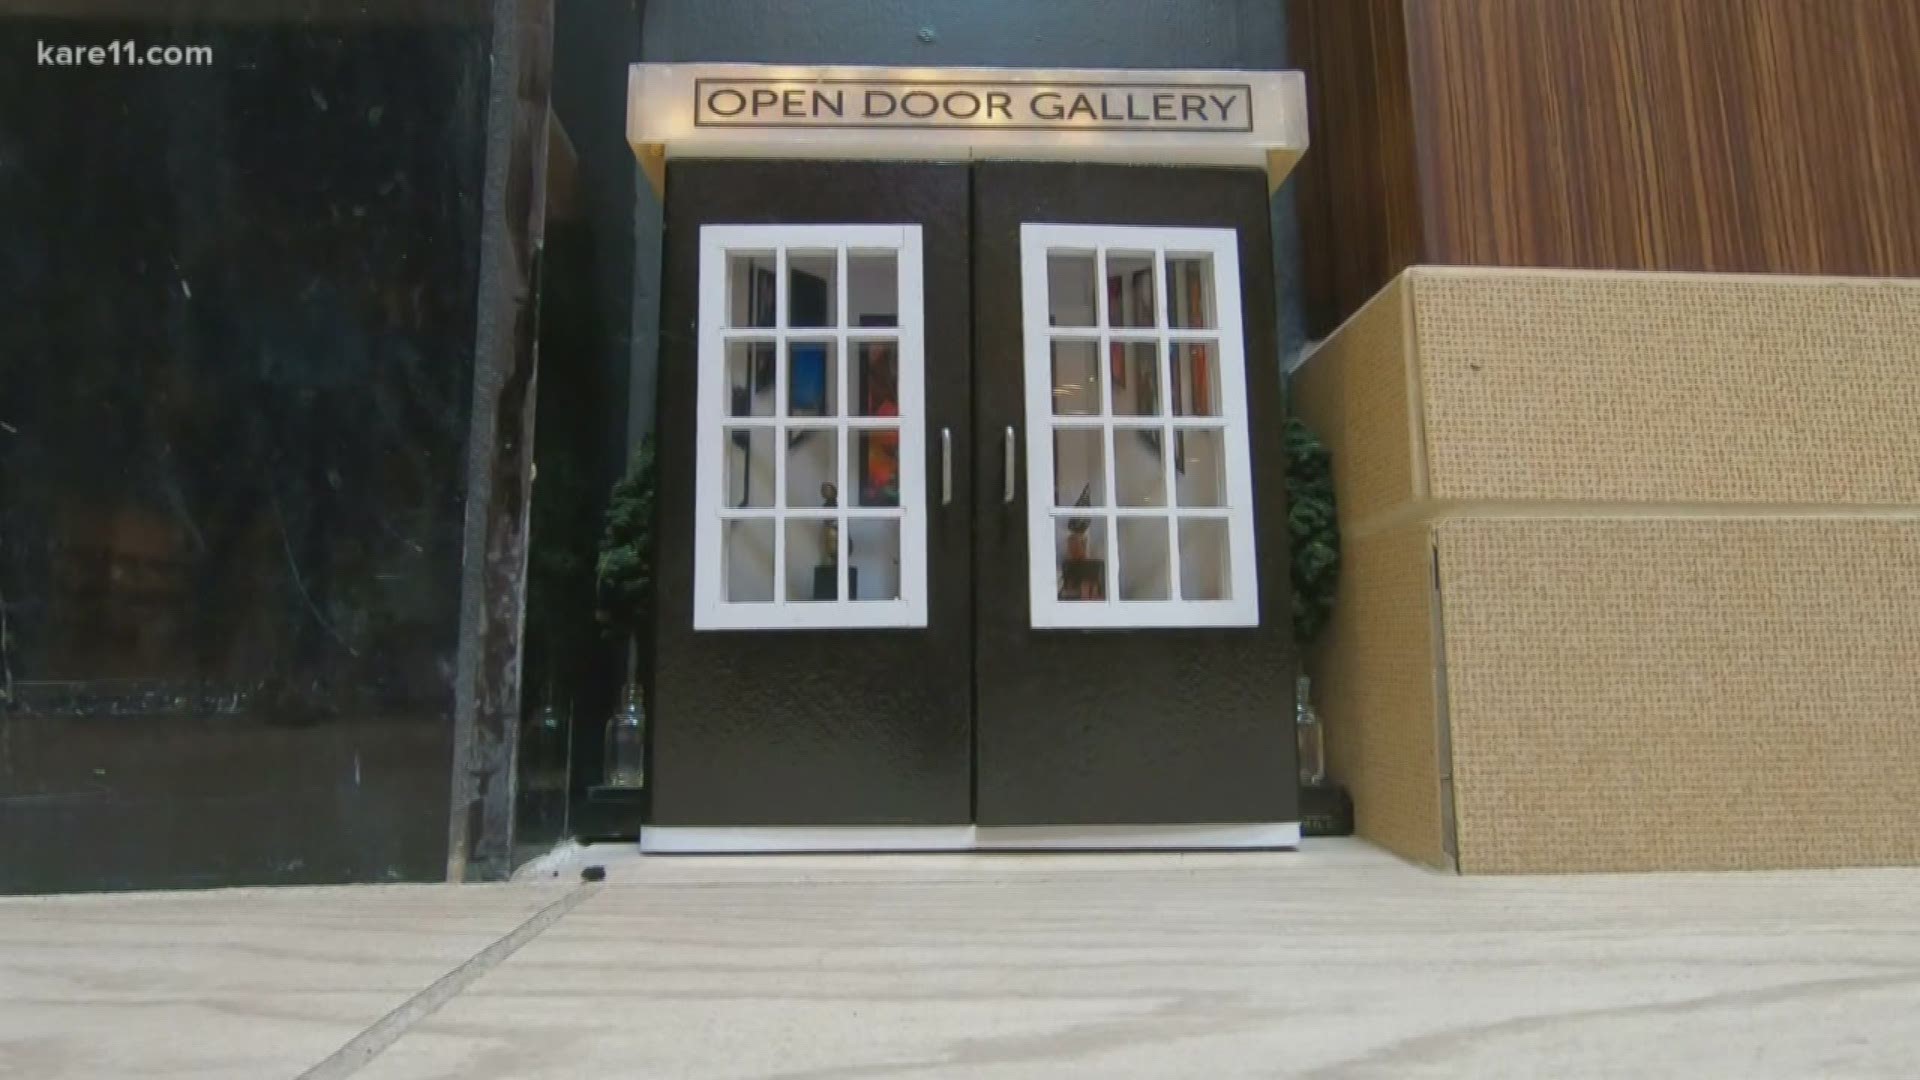 The contest encourages guests to locate 12 custom-made "tiny doors" and post their finds to social media to help Big Brothers Big Sisters Twin Cities.